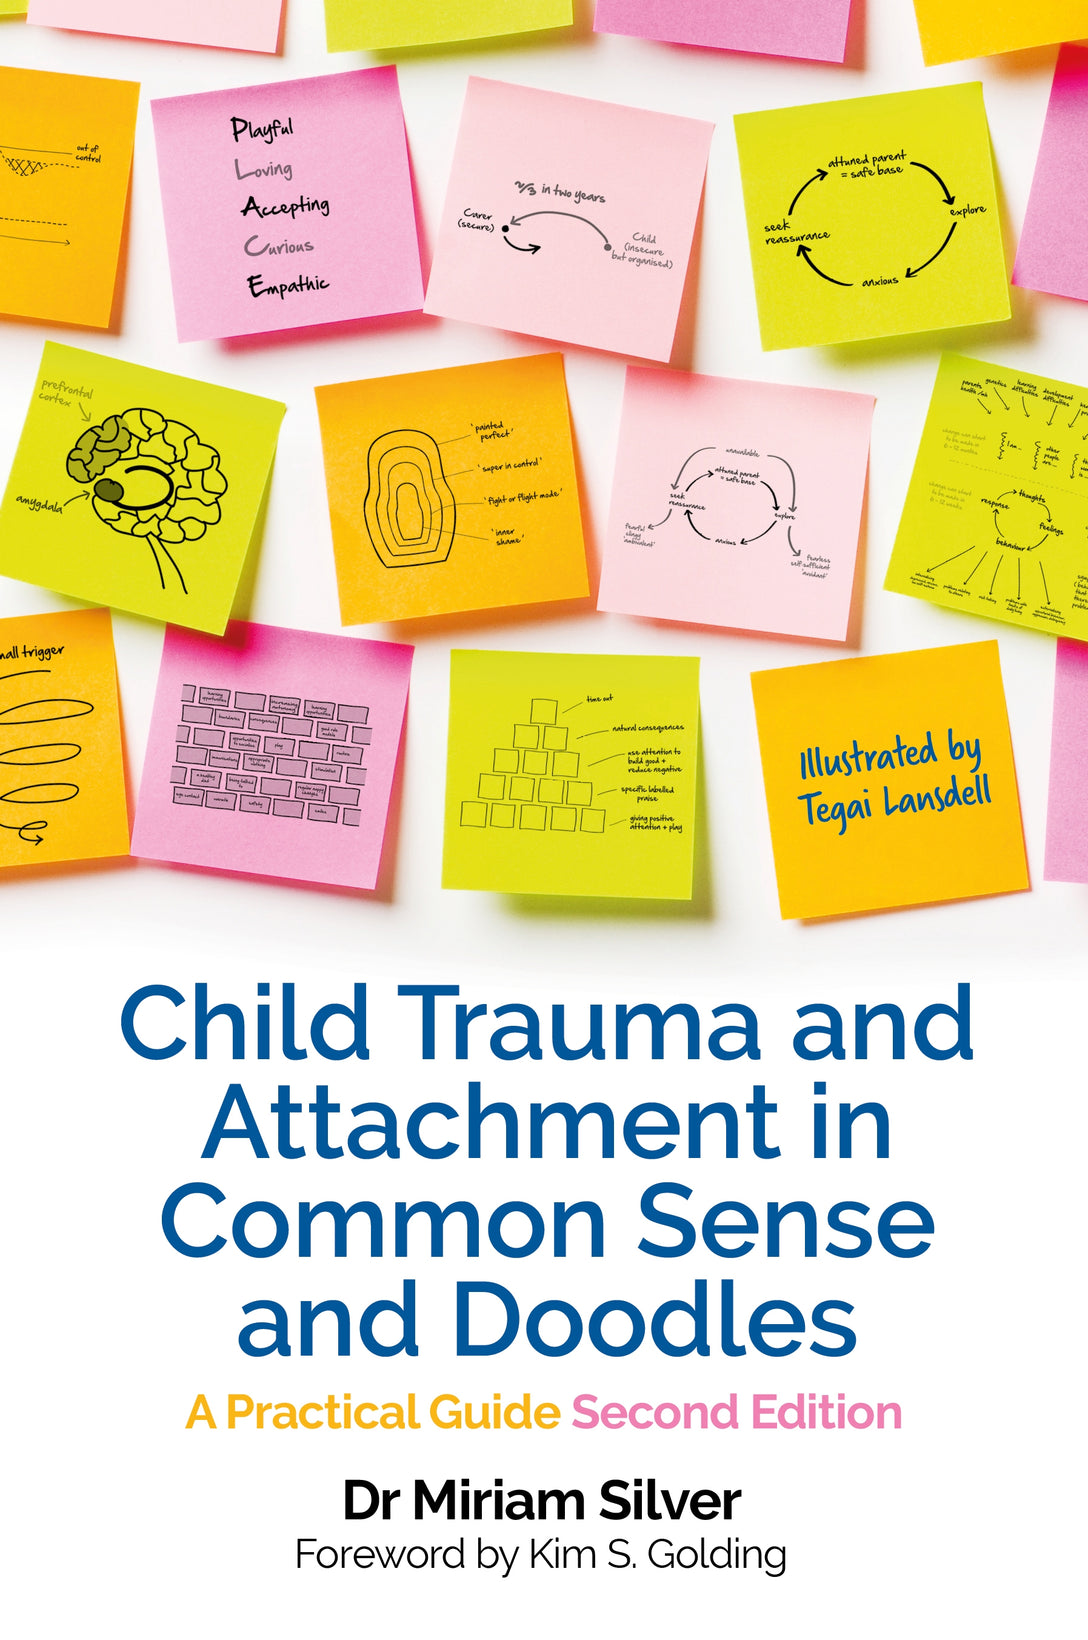 Child Trauma and Attachment in Common Sense and Doodles – Second Edition by Kim S. Golding, Teg Lansdell, Miriam Silver